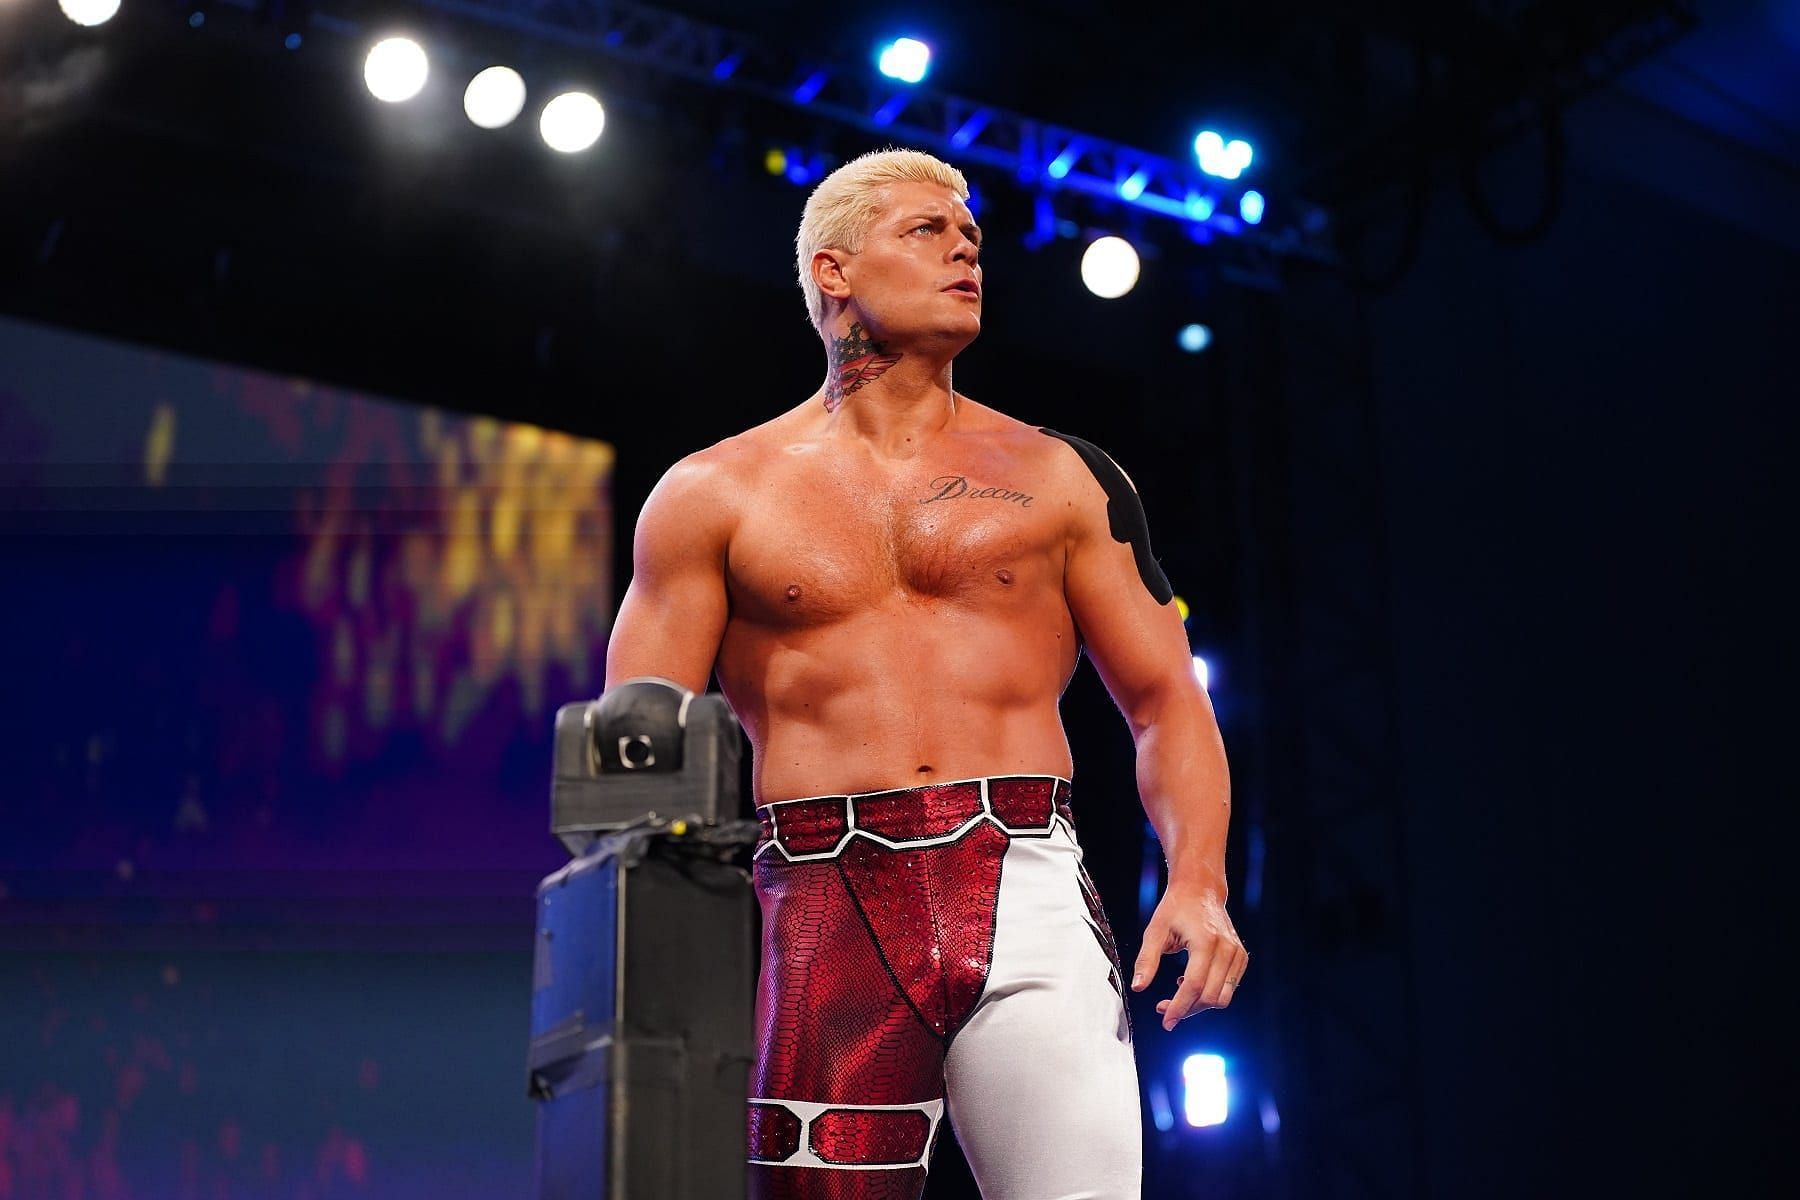 Cody Rhodes is set to be part of a new tag-team